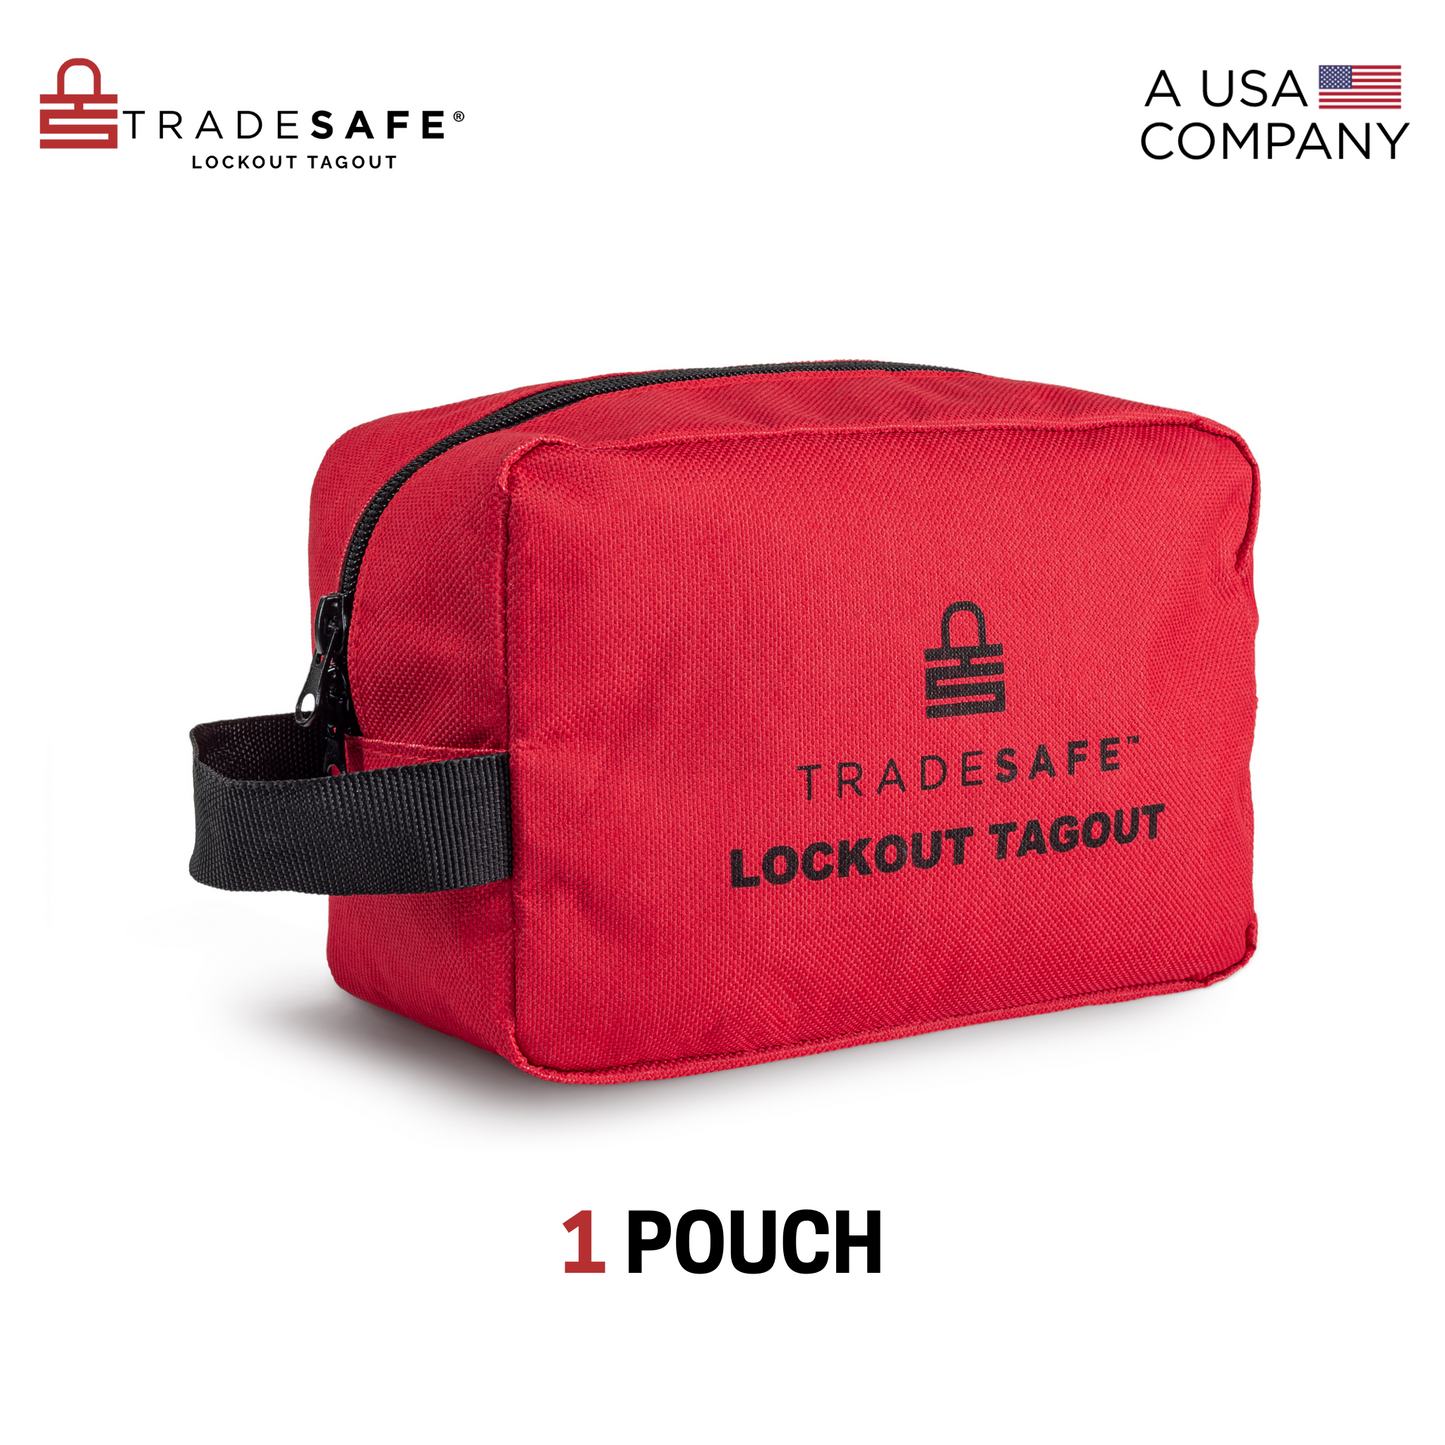 one red tradesafe lockout tagout pouch